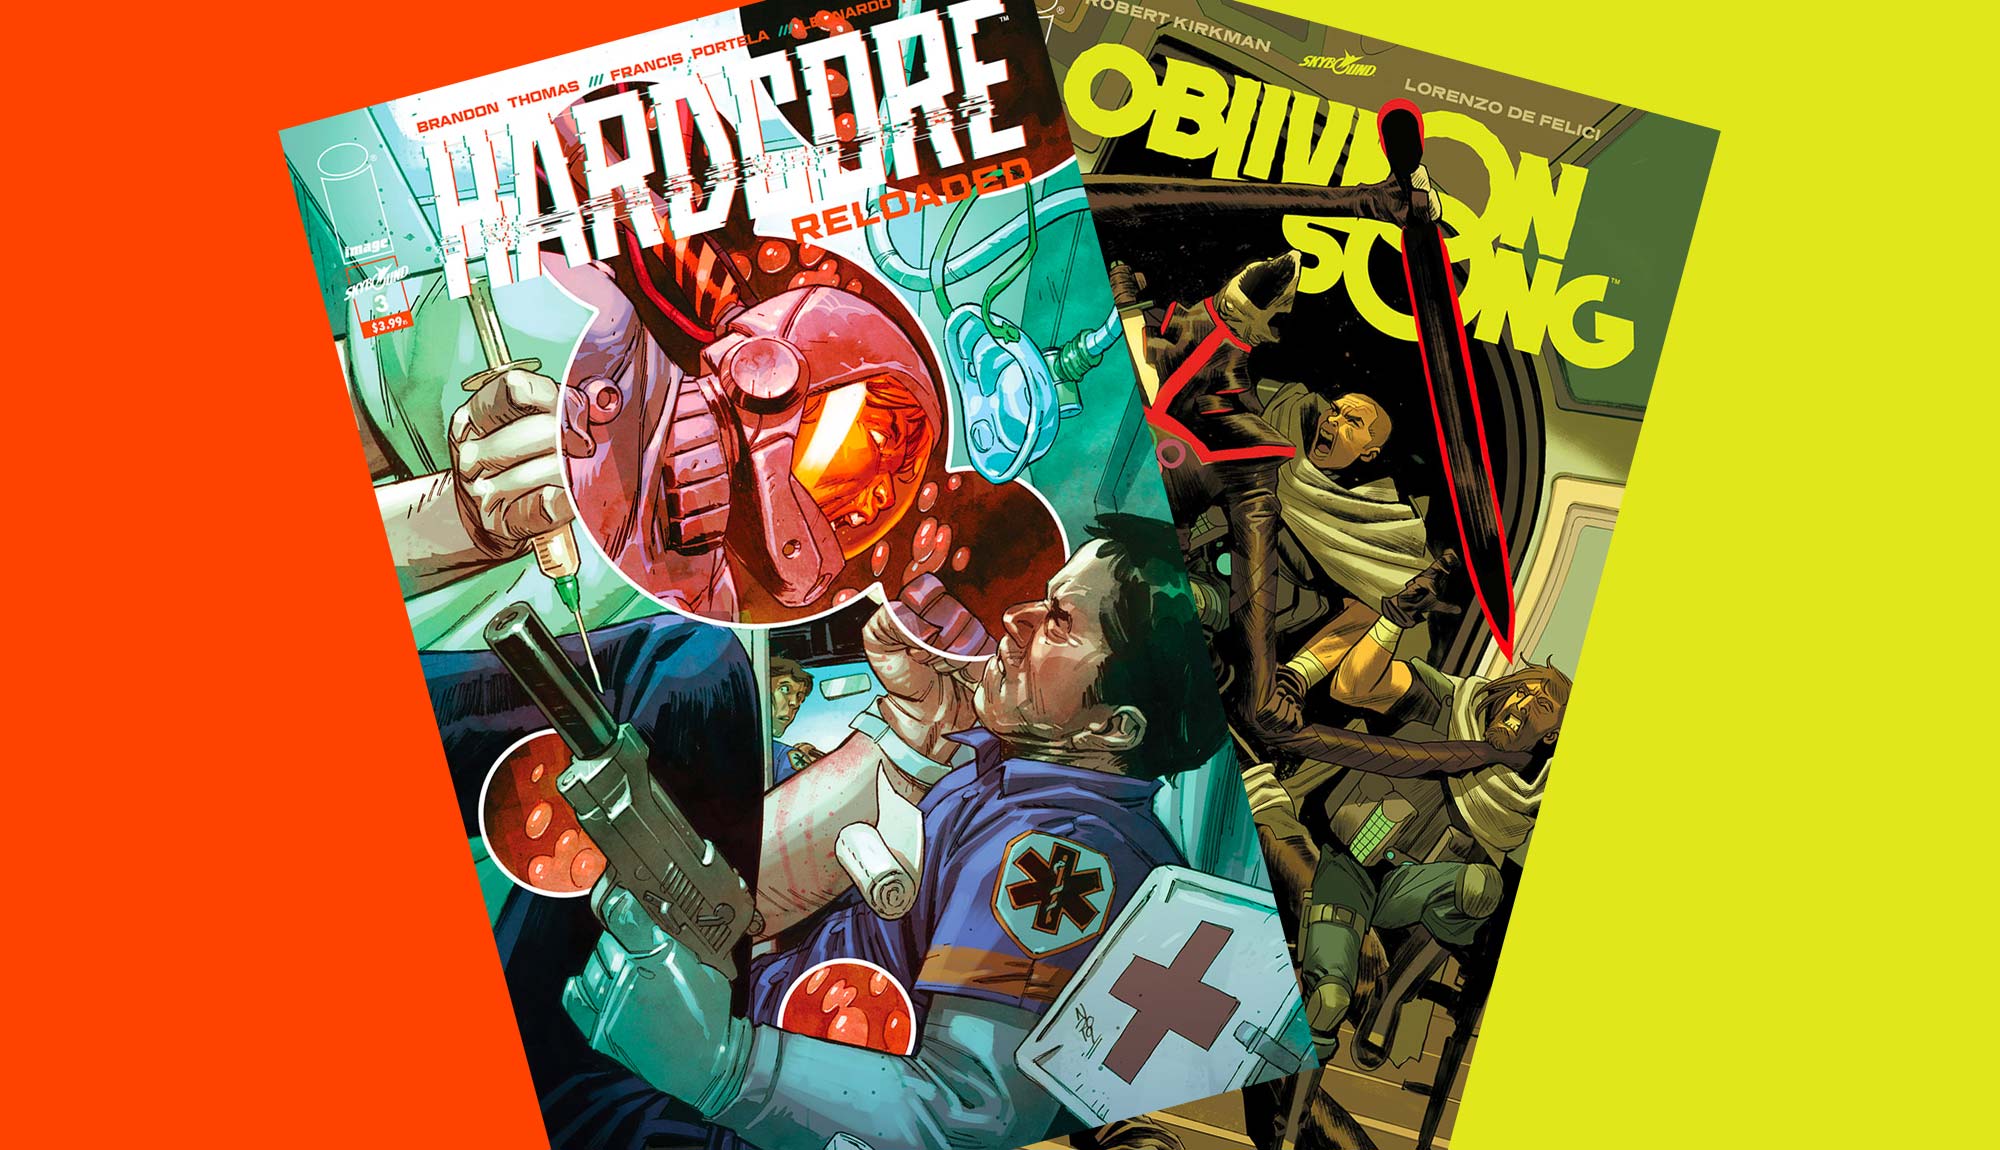 This Week’s Comics: HARDCORE: RELOADED and OBLIVION SONG